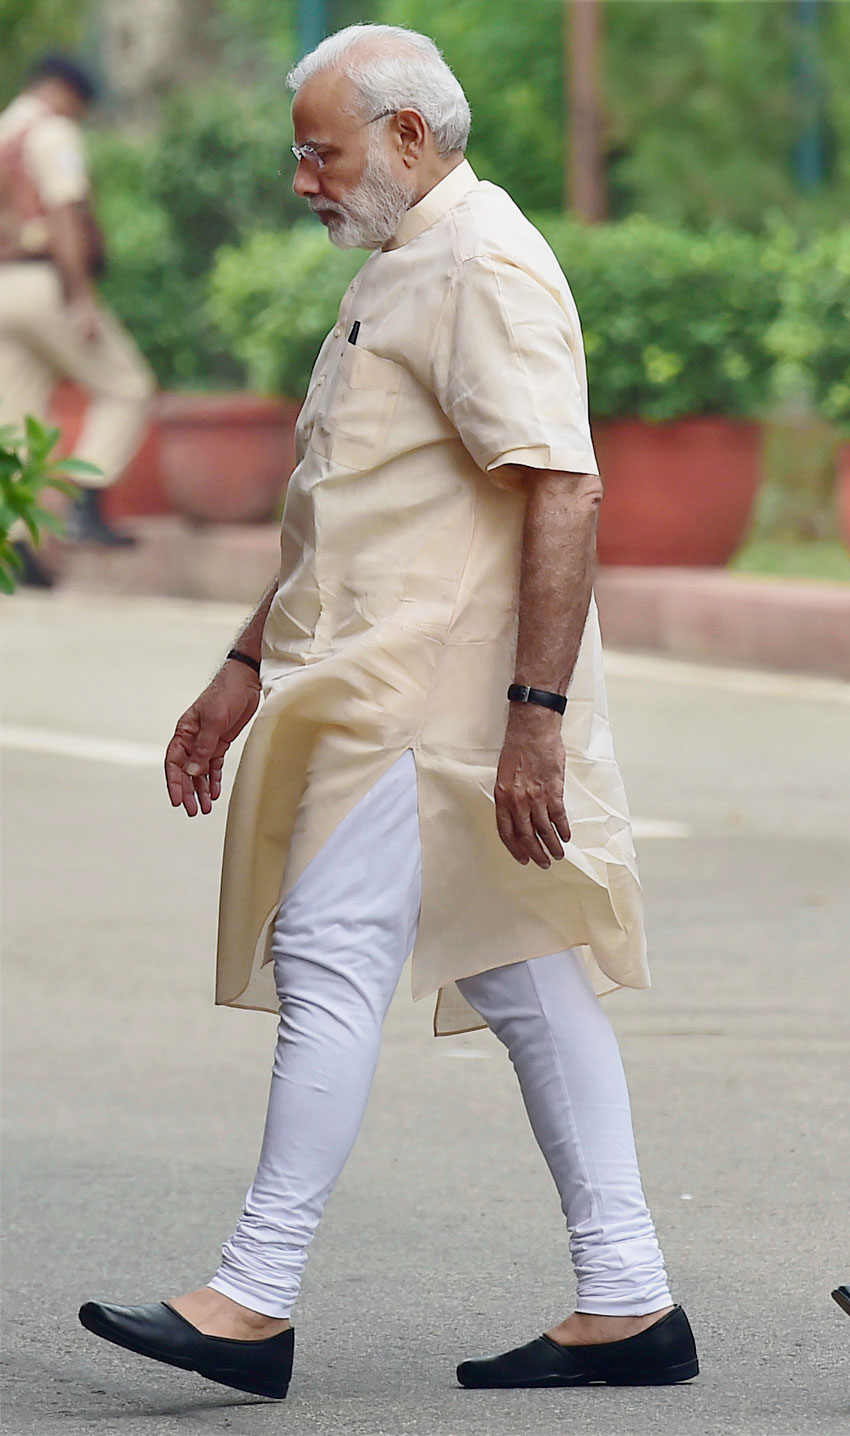 Prime Minster Narendra Modi after the BJP Parliamentary Party meeting during the monsoon session at parliament in New Delhi, July 26. (Kamal Kishore | PTI)